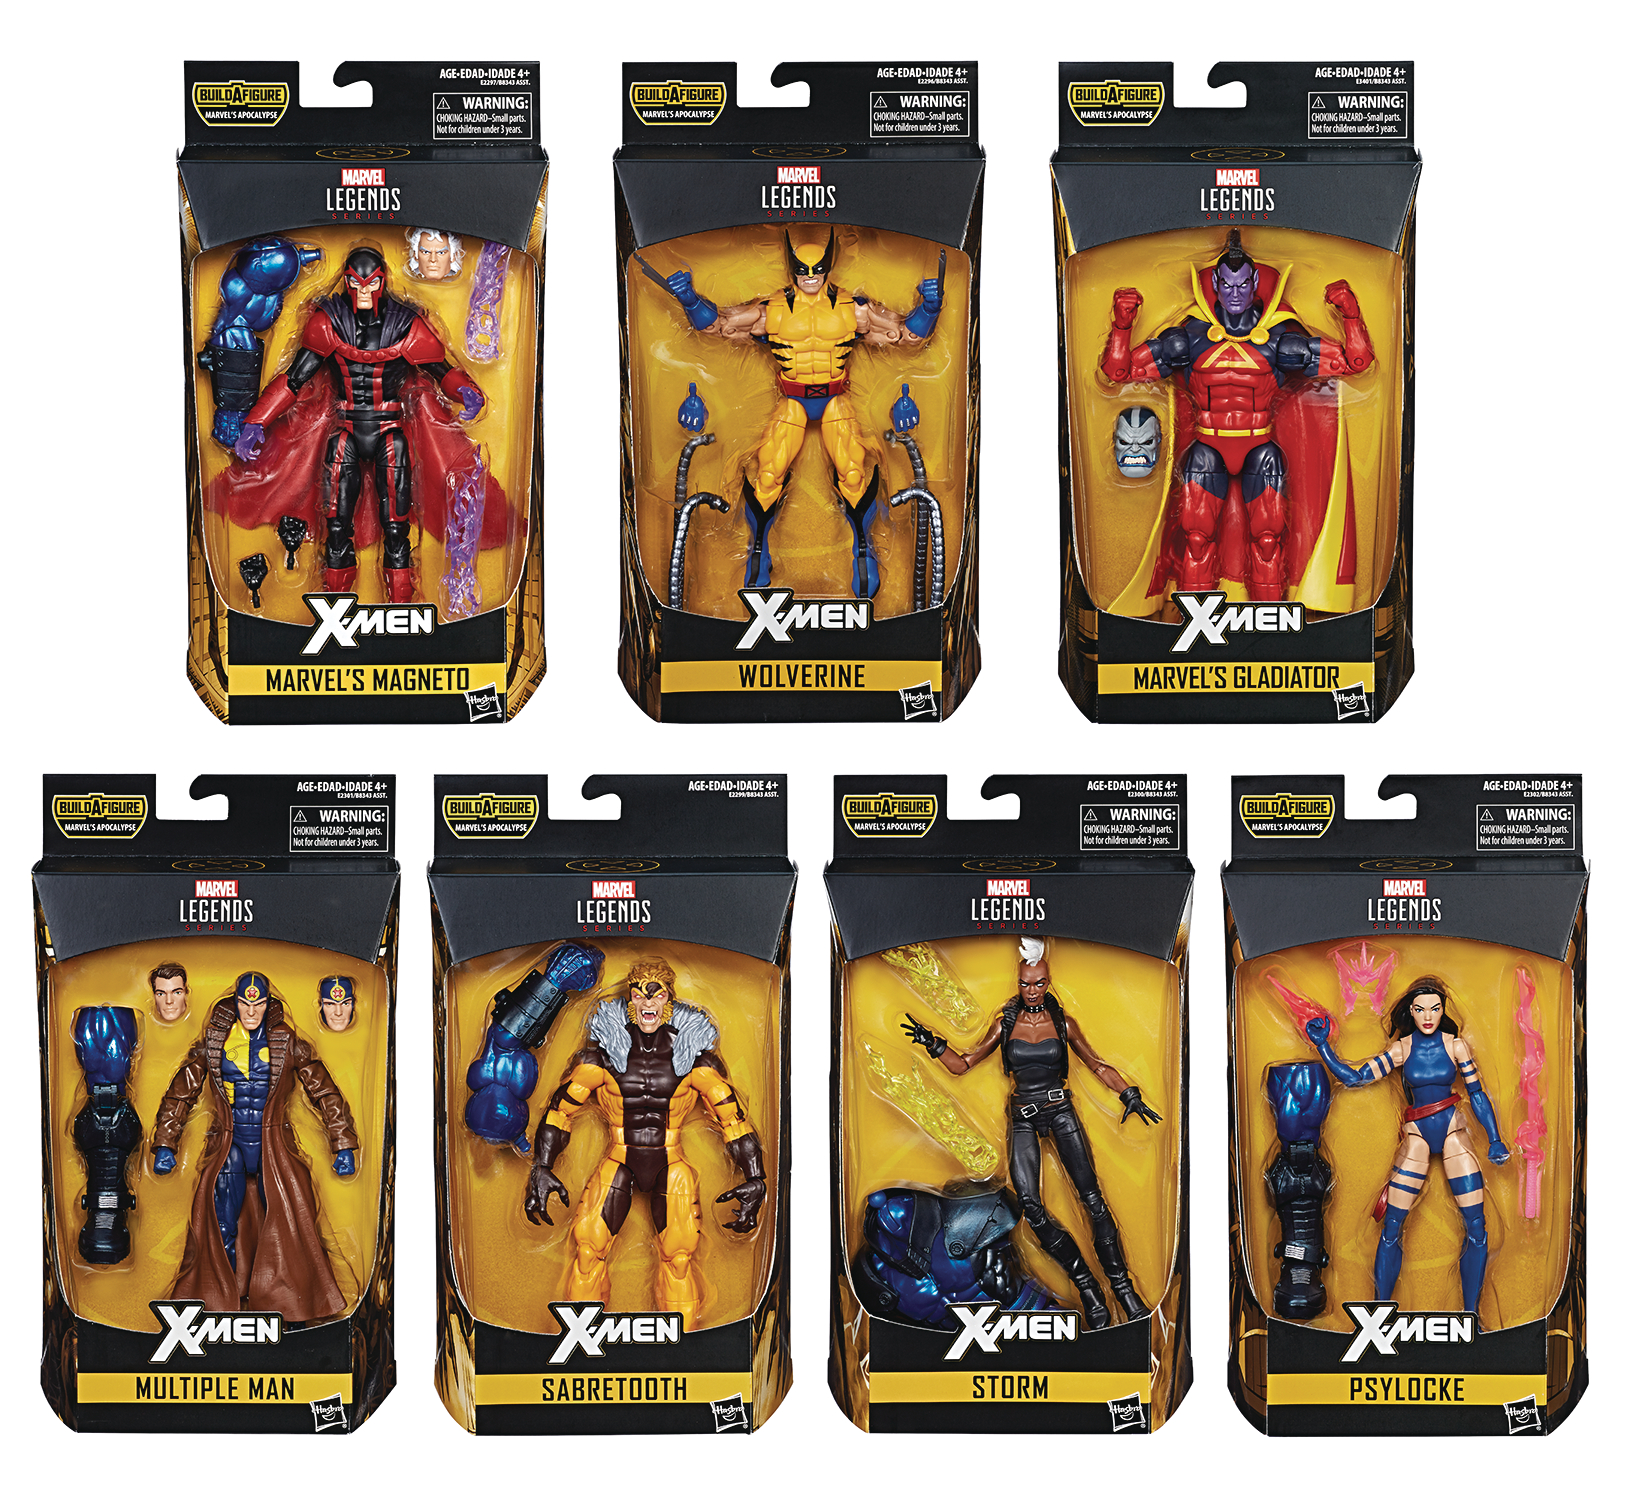 New Marvel Legends Featuring Venom And X Men Arriving At Comic Shops Previews World